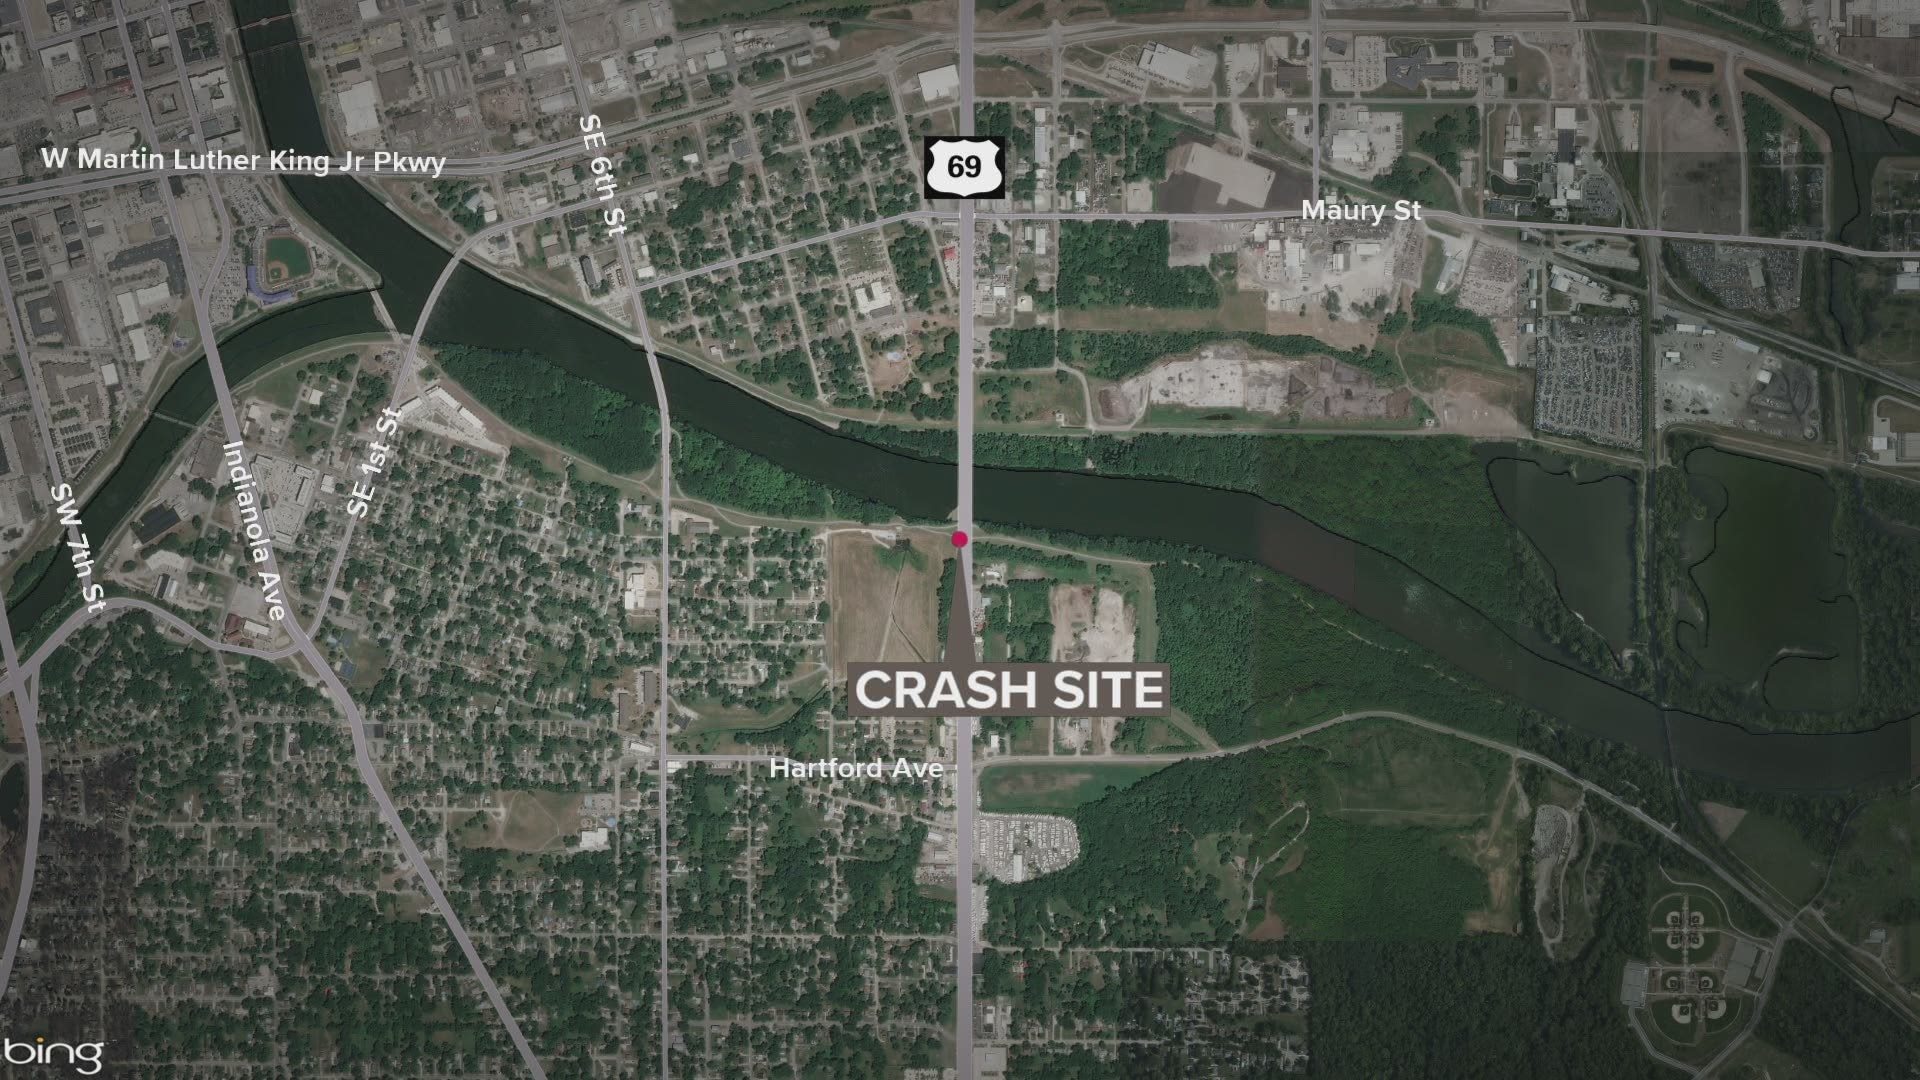 A man is dead after crashing a vehicle into a tree early Saturday morning in Des Moines, officers said.